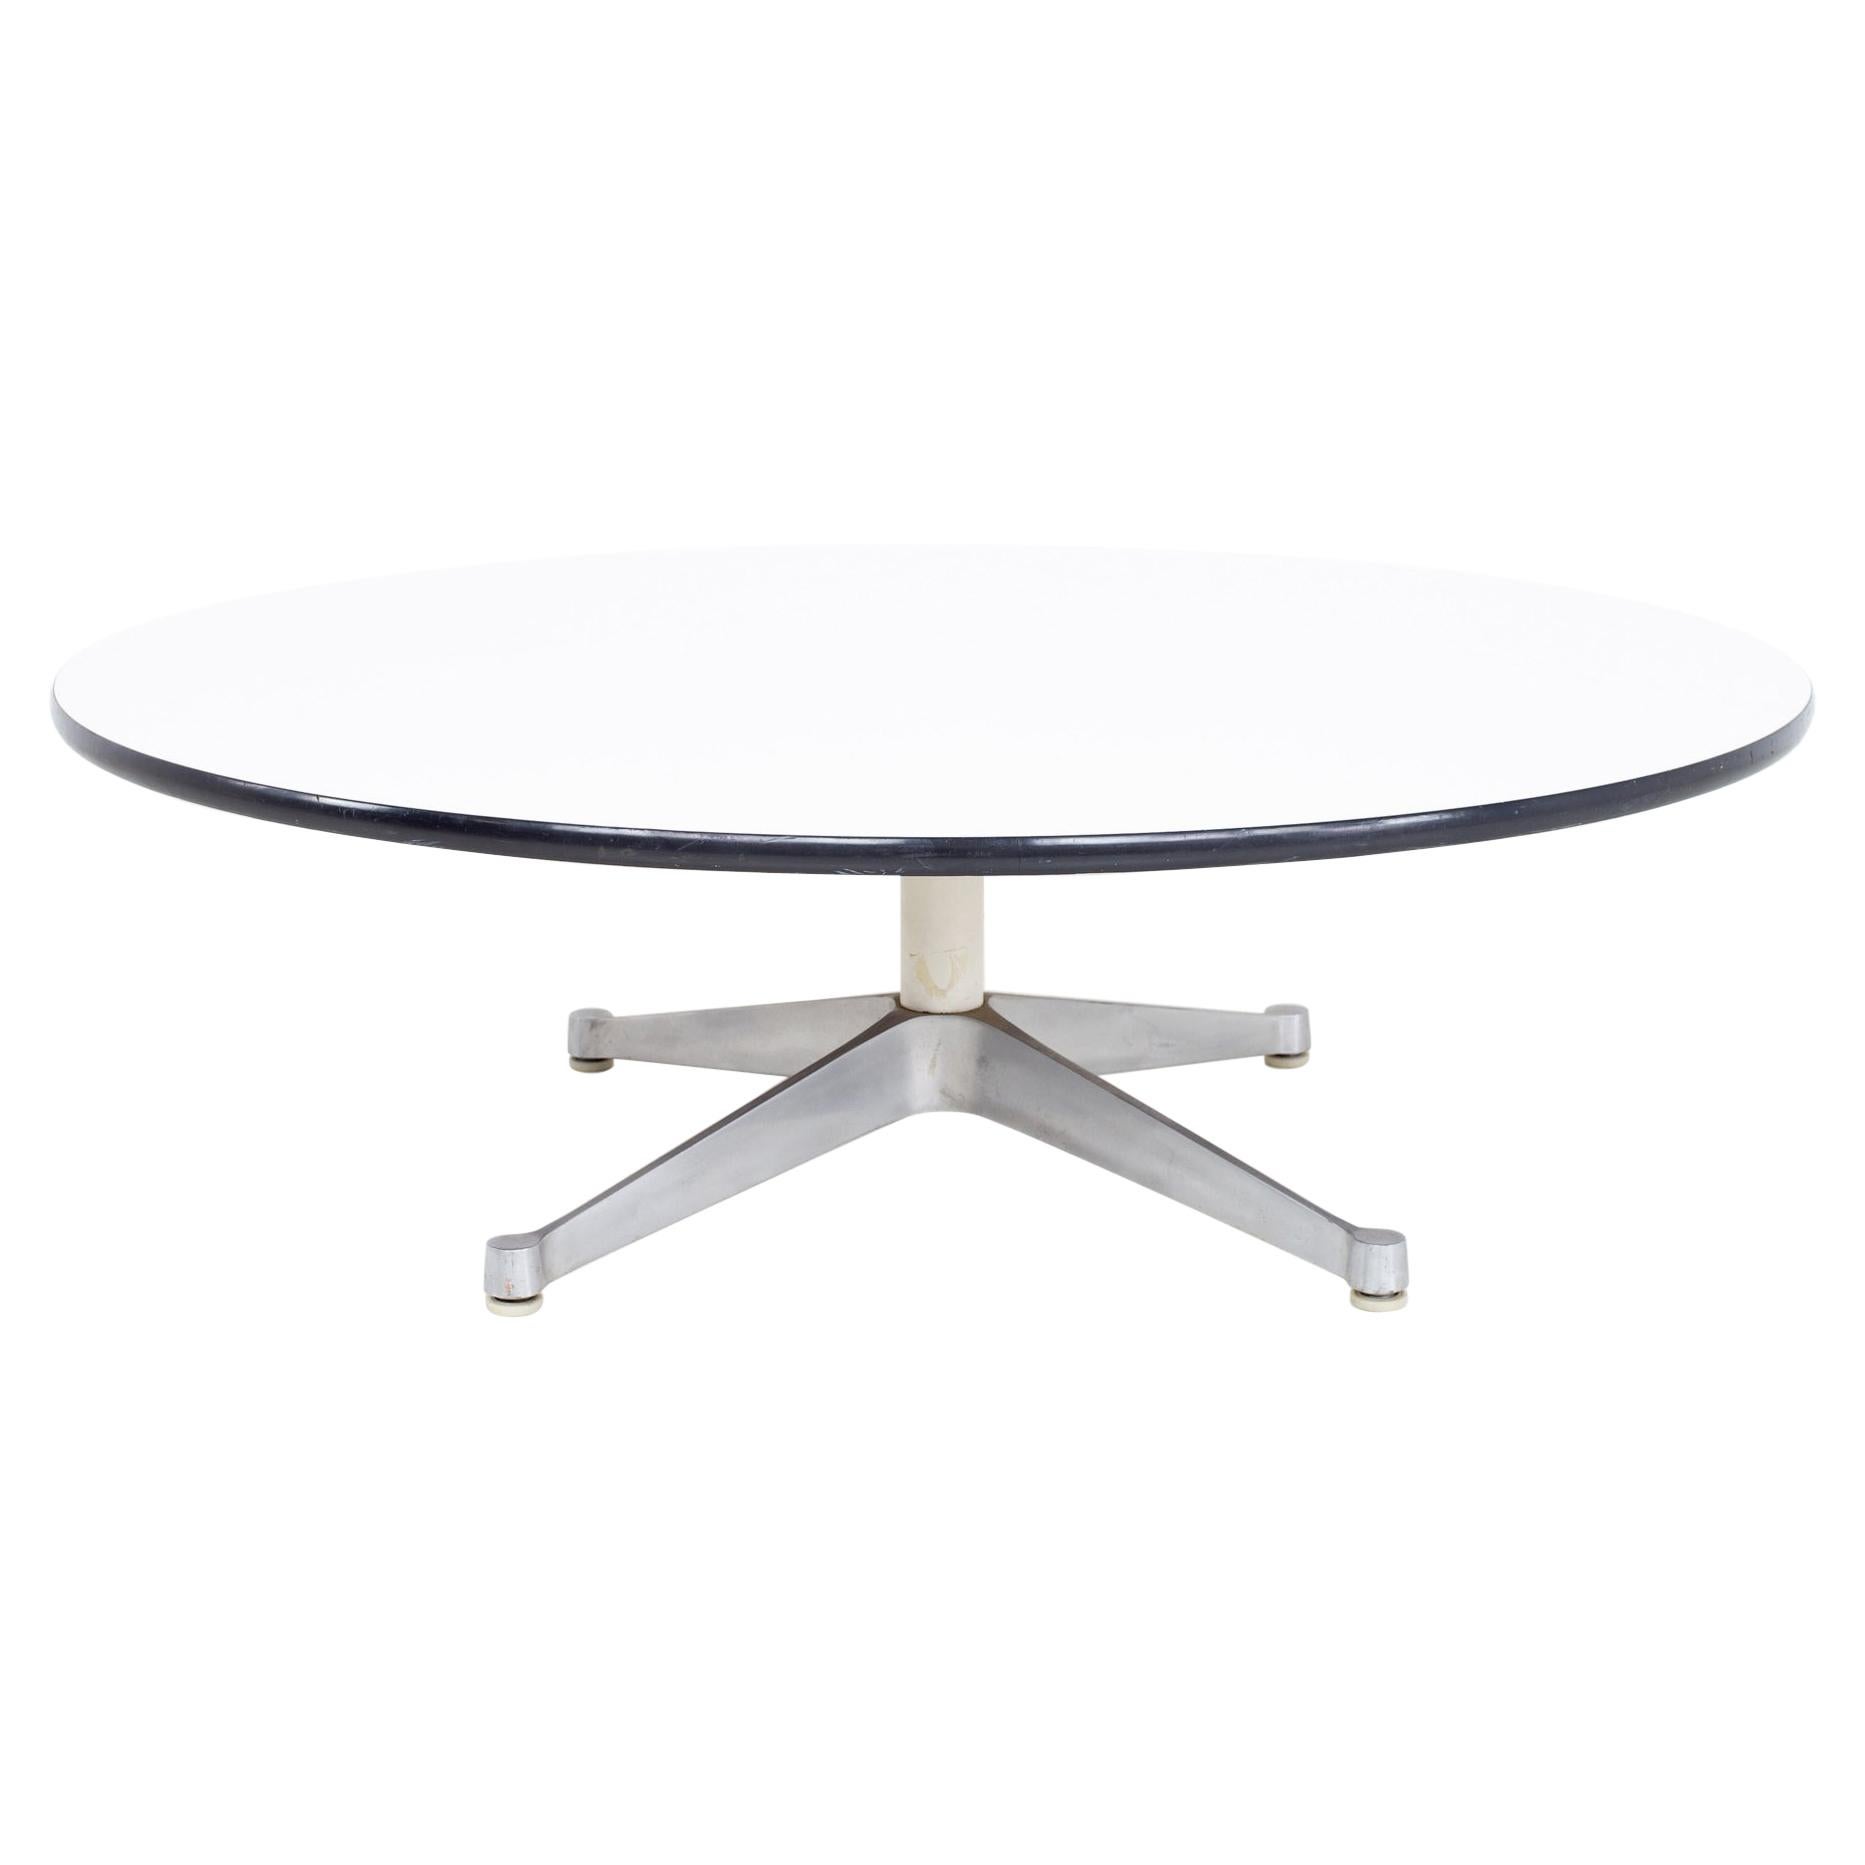 Charles Ray Eames Herman Miller Aluminum Group MCM Round Stainless Coffee Table